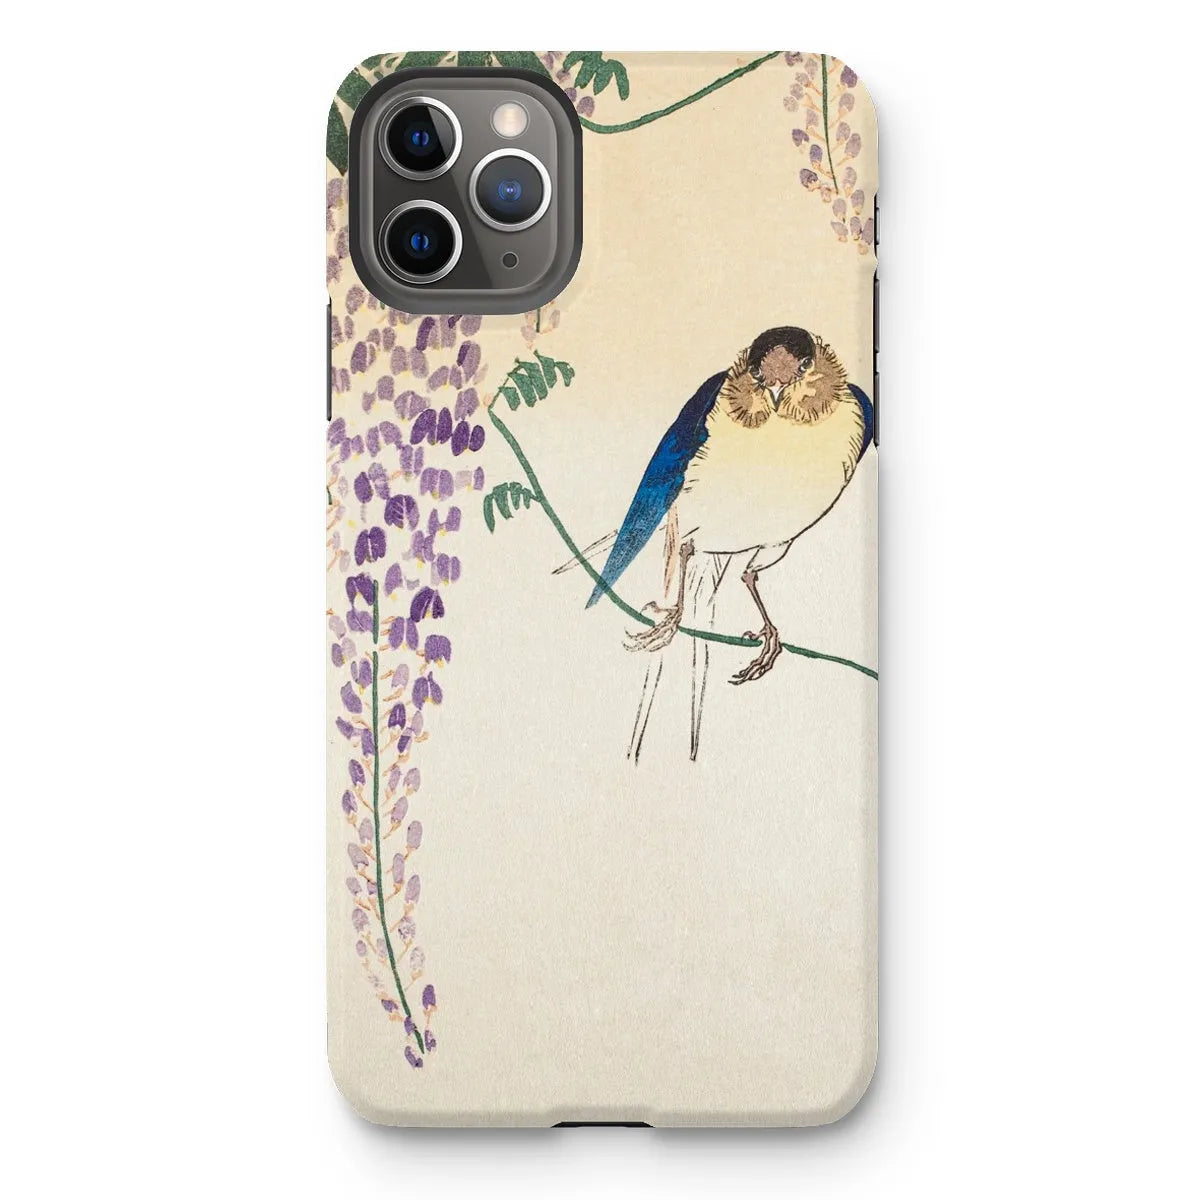 Wisteria And Swallow - Japanese Art Phone Case - Ohara Koson - Iphone 11 Pro Max / Matte - Mobile Phone Cases